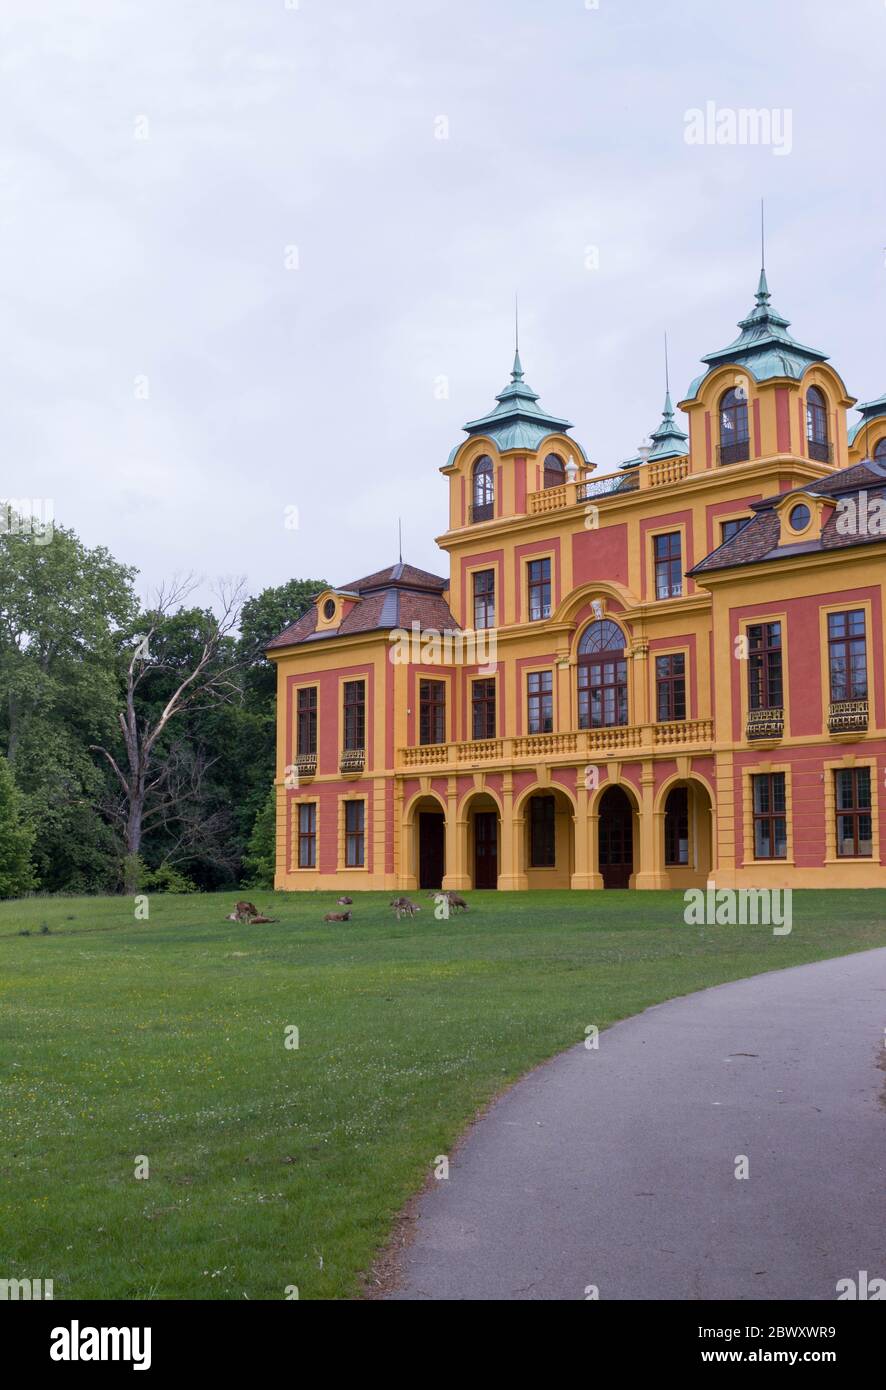 18th century red and yellow fairytale castle 'Schloss Favorite' in Ludwigsburg, Germany with deer on green lawn Stock Photo